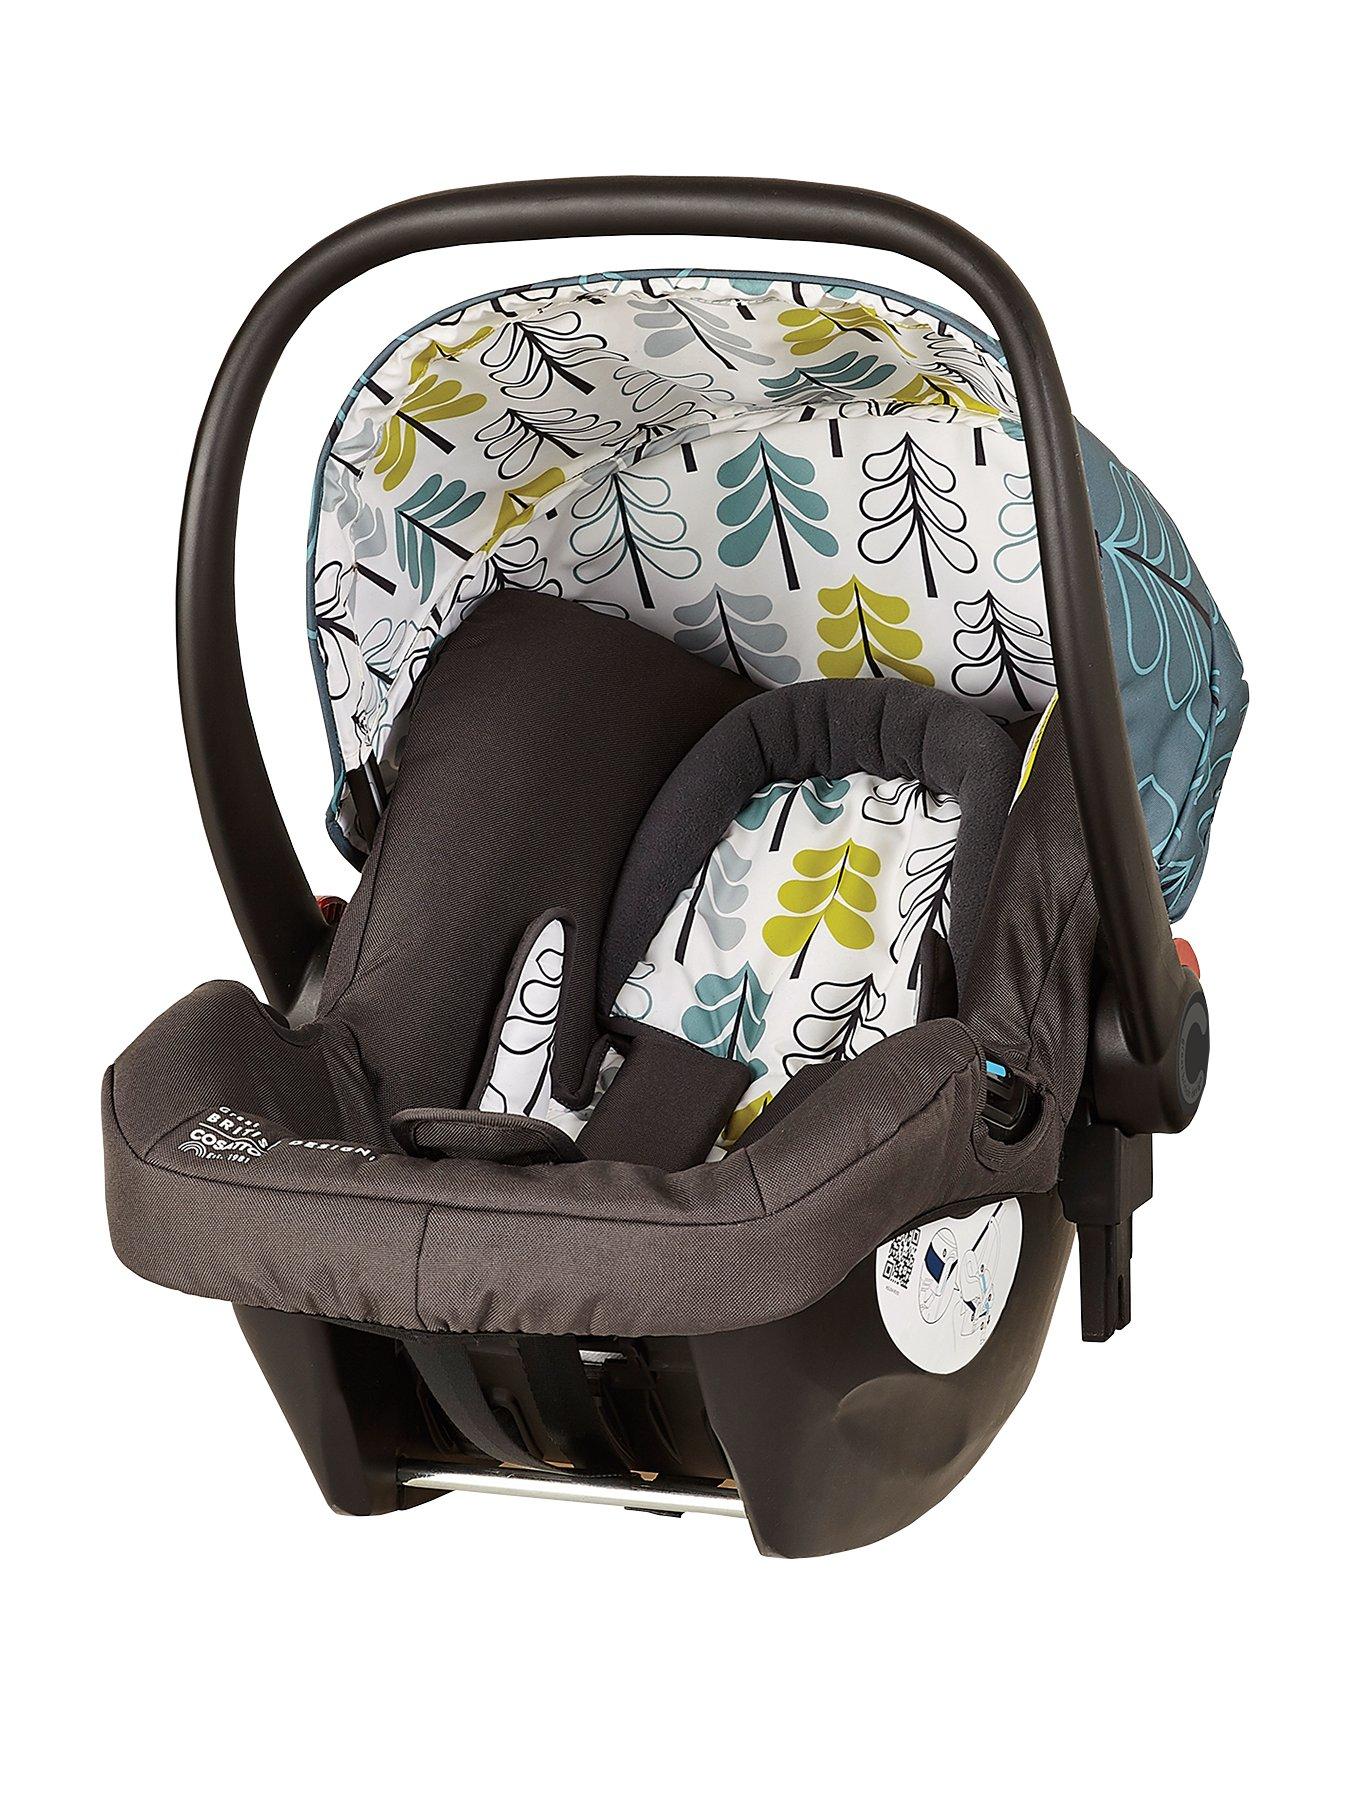 travel system compatible